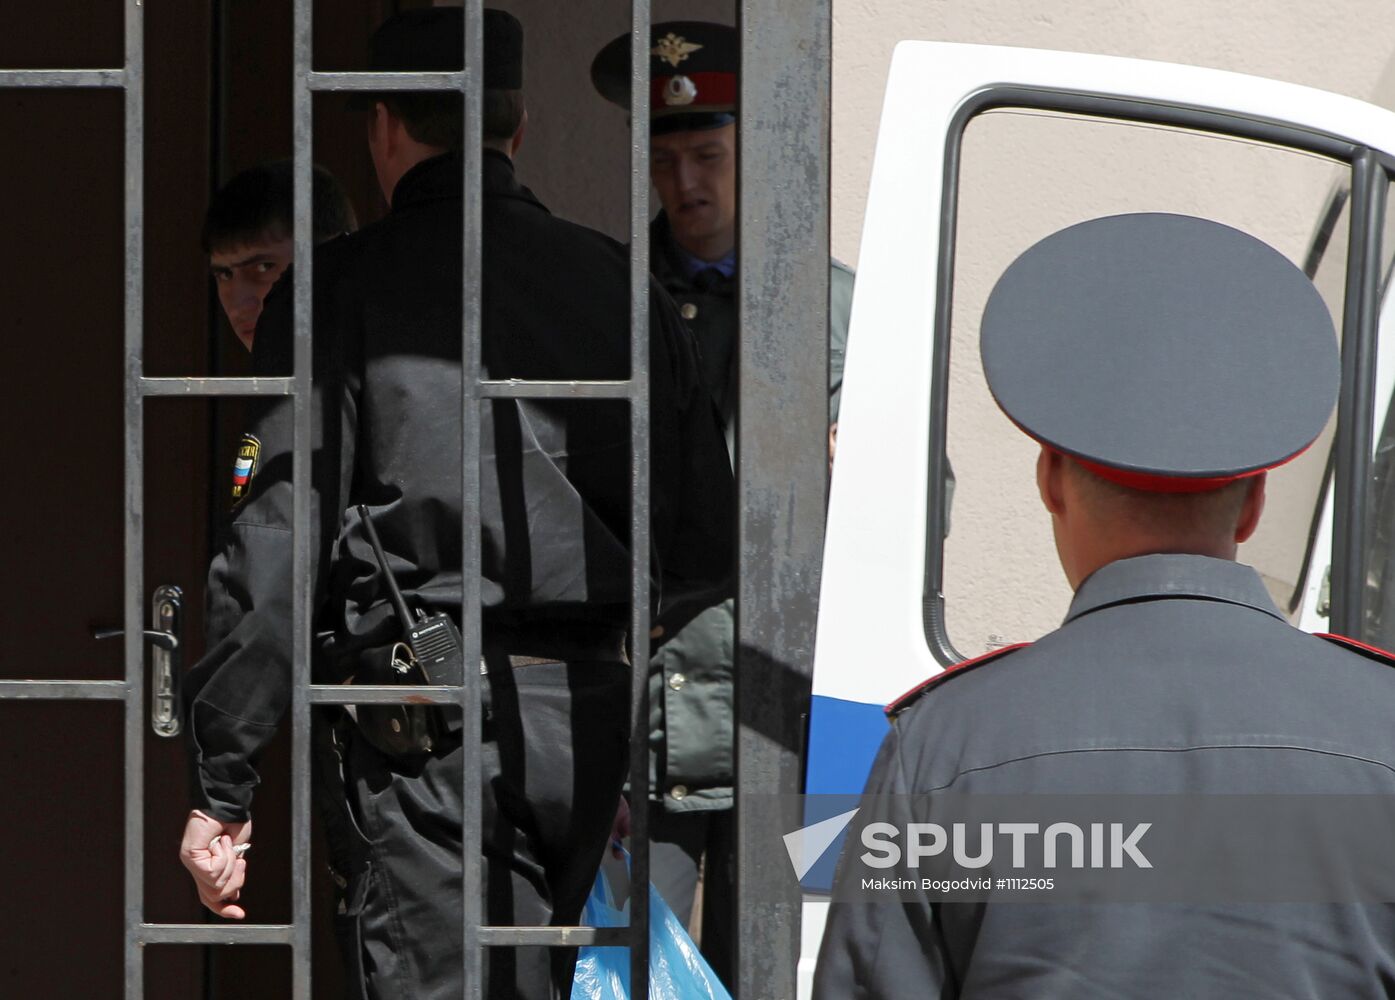 Trial of officers of Dalny internal affairs department in Kazan